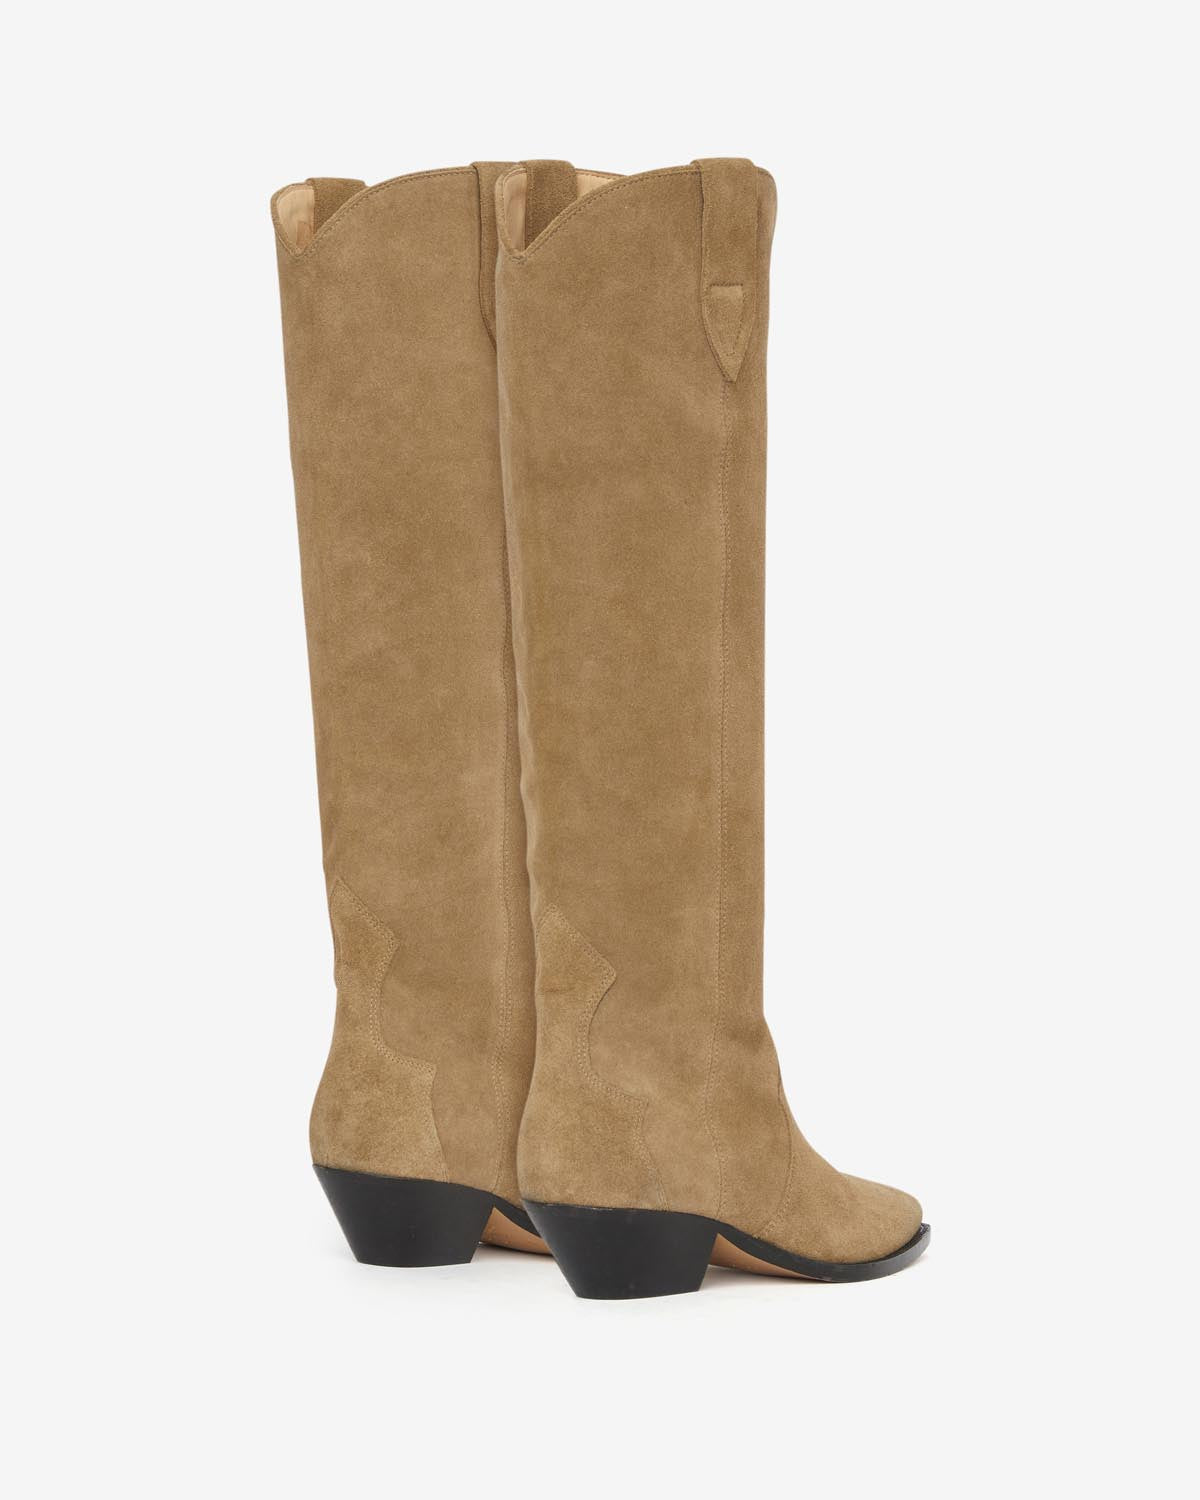 Denvee boots Woman Taupe 6